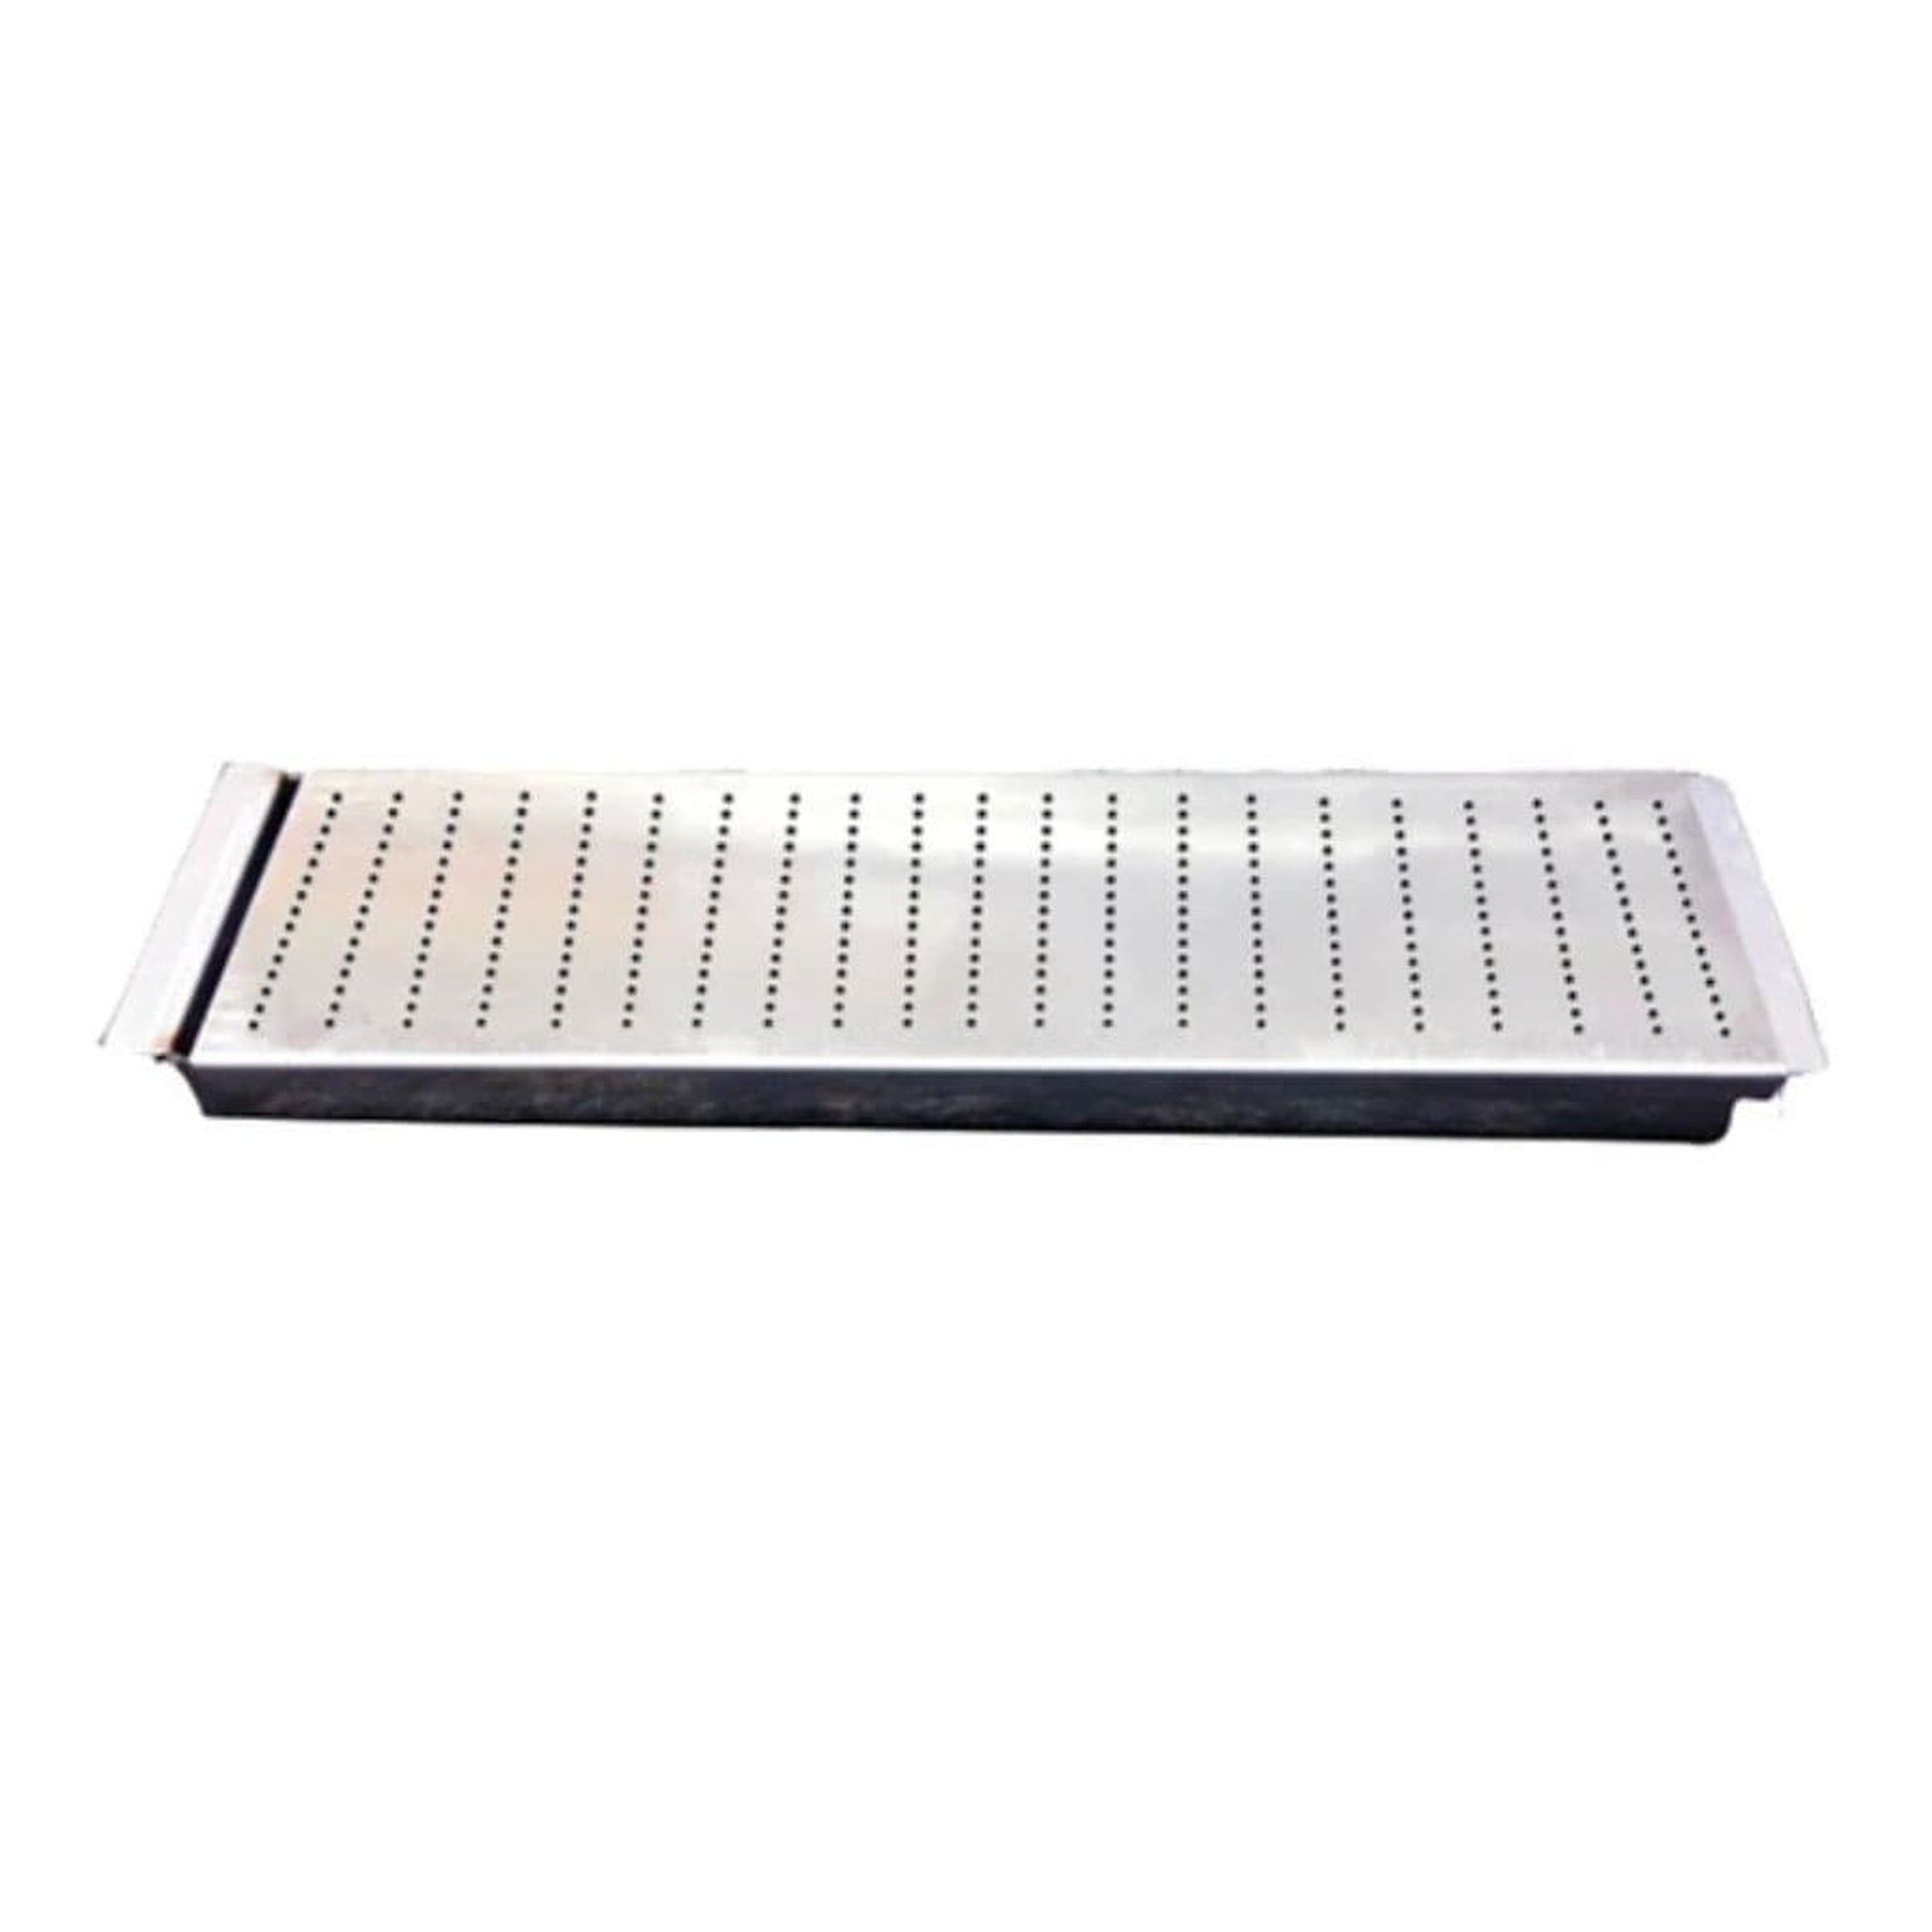 Summerset Smoker Tray Accessory for Sizzler Grills